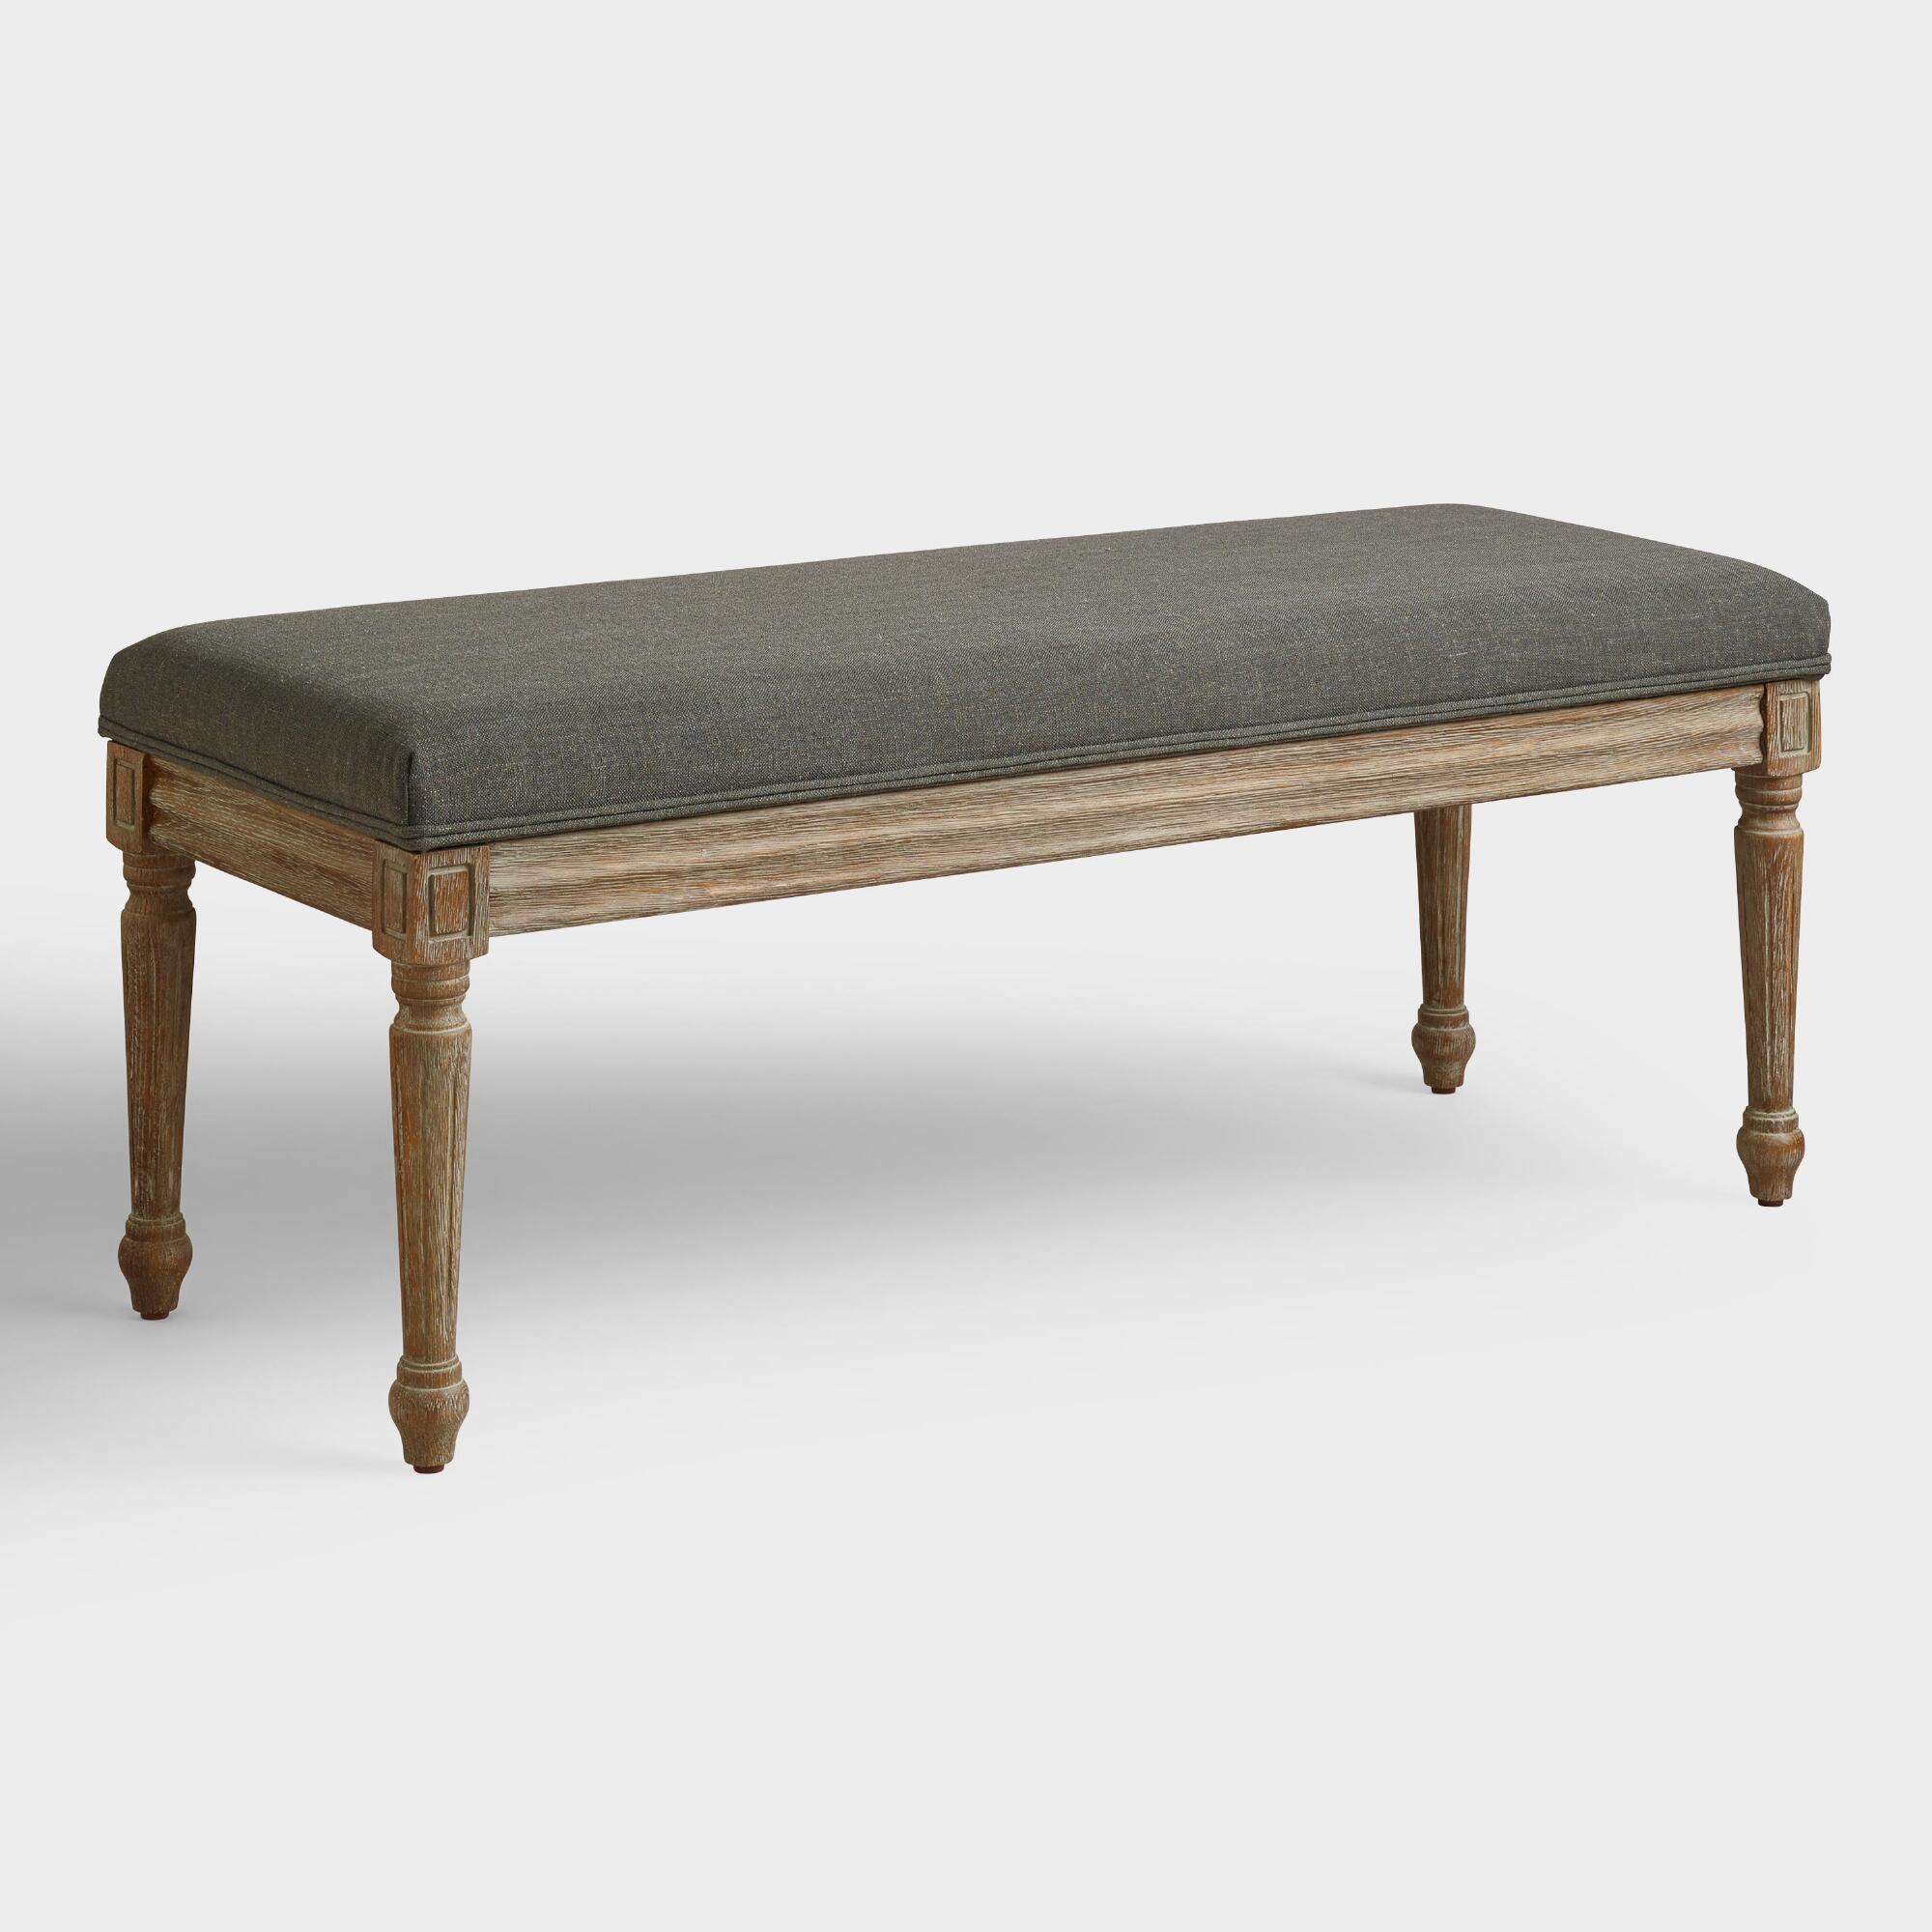 dining room benches banquettes settees world market iipsrv fcgi harper round wood and metal accent table charcoal linen paige bench inch wall clock tray top end quilted runners